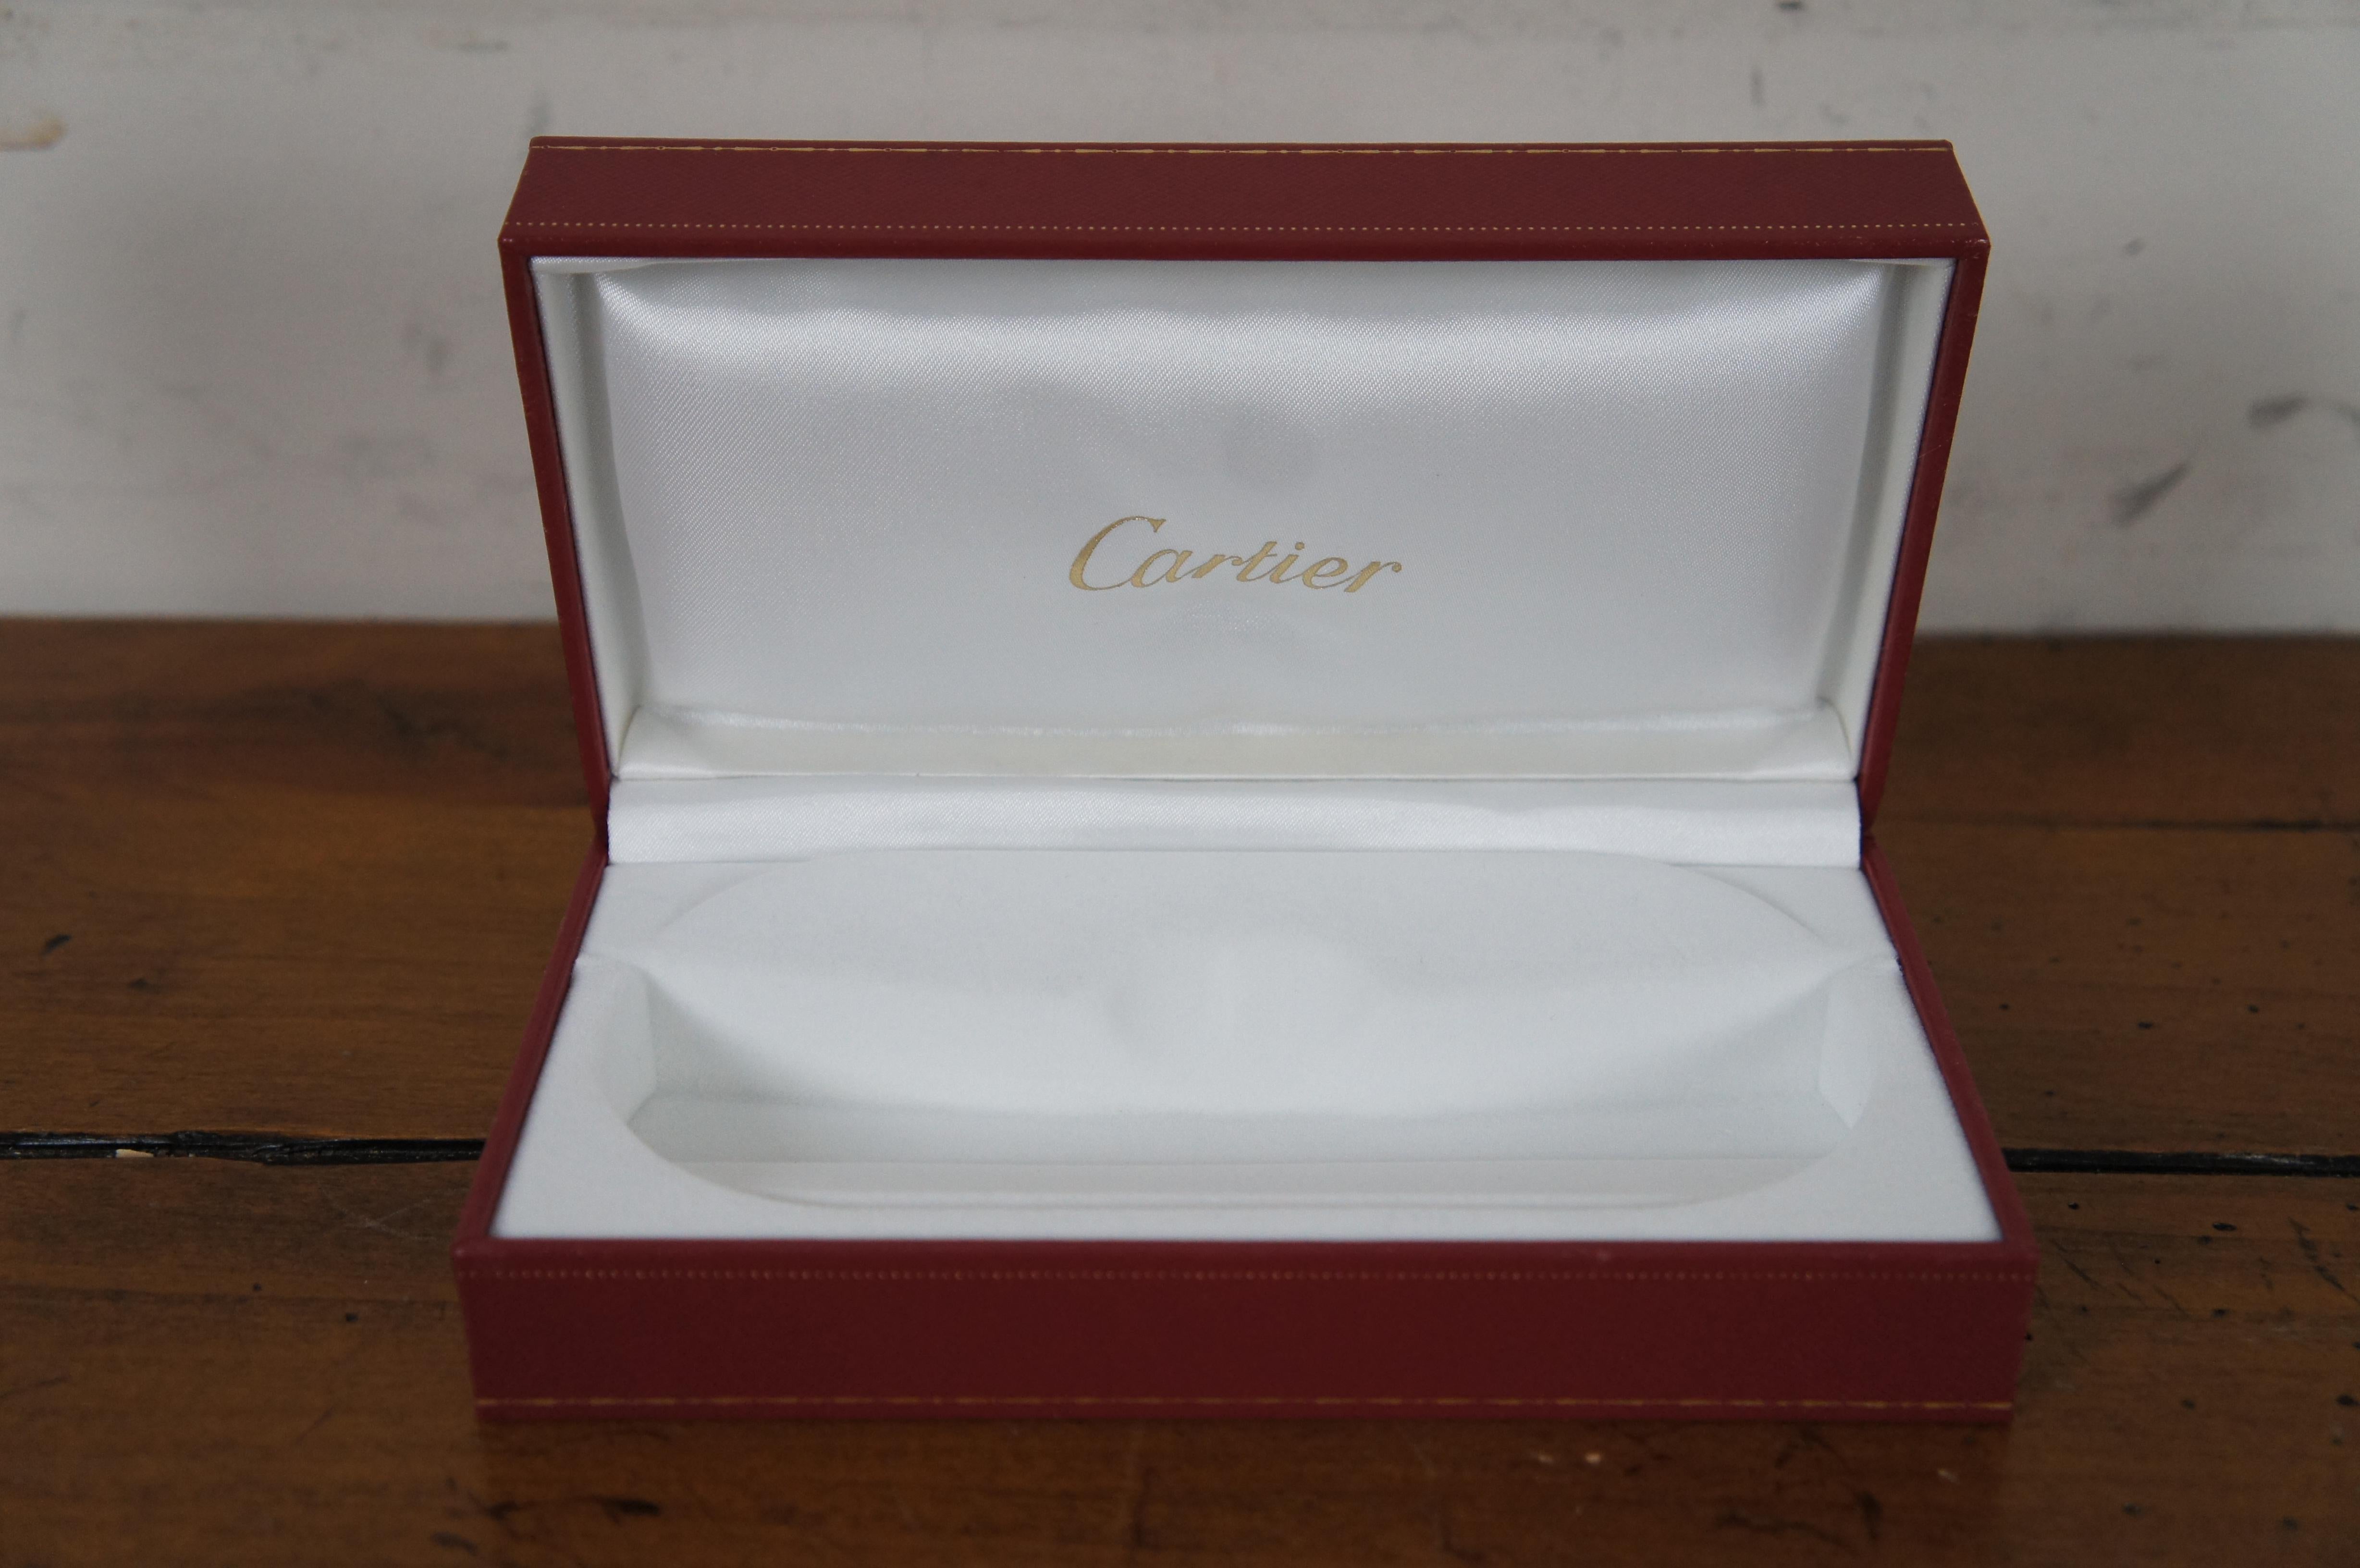 2 Cartier Glasses Sunglasses Case Pair Red Leather Sleeve Embossed Box 7